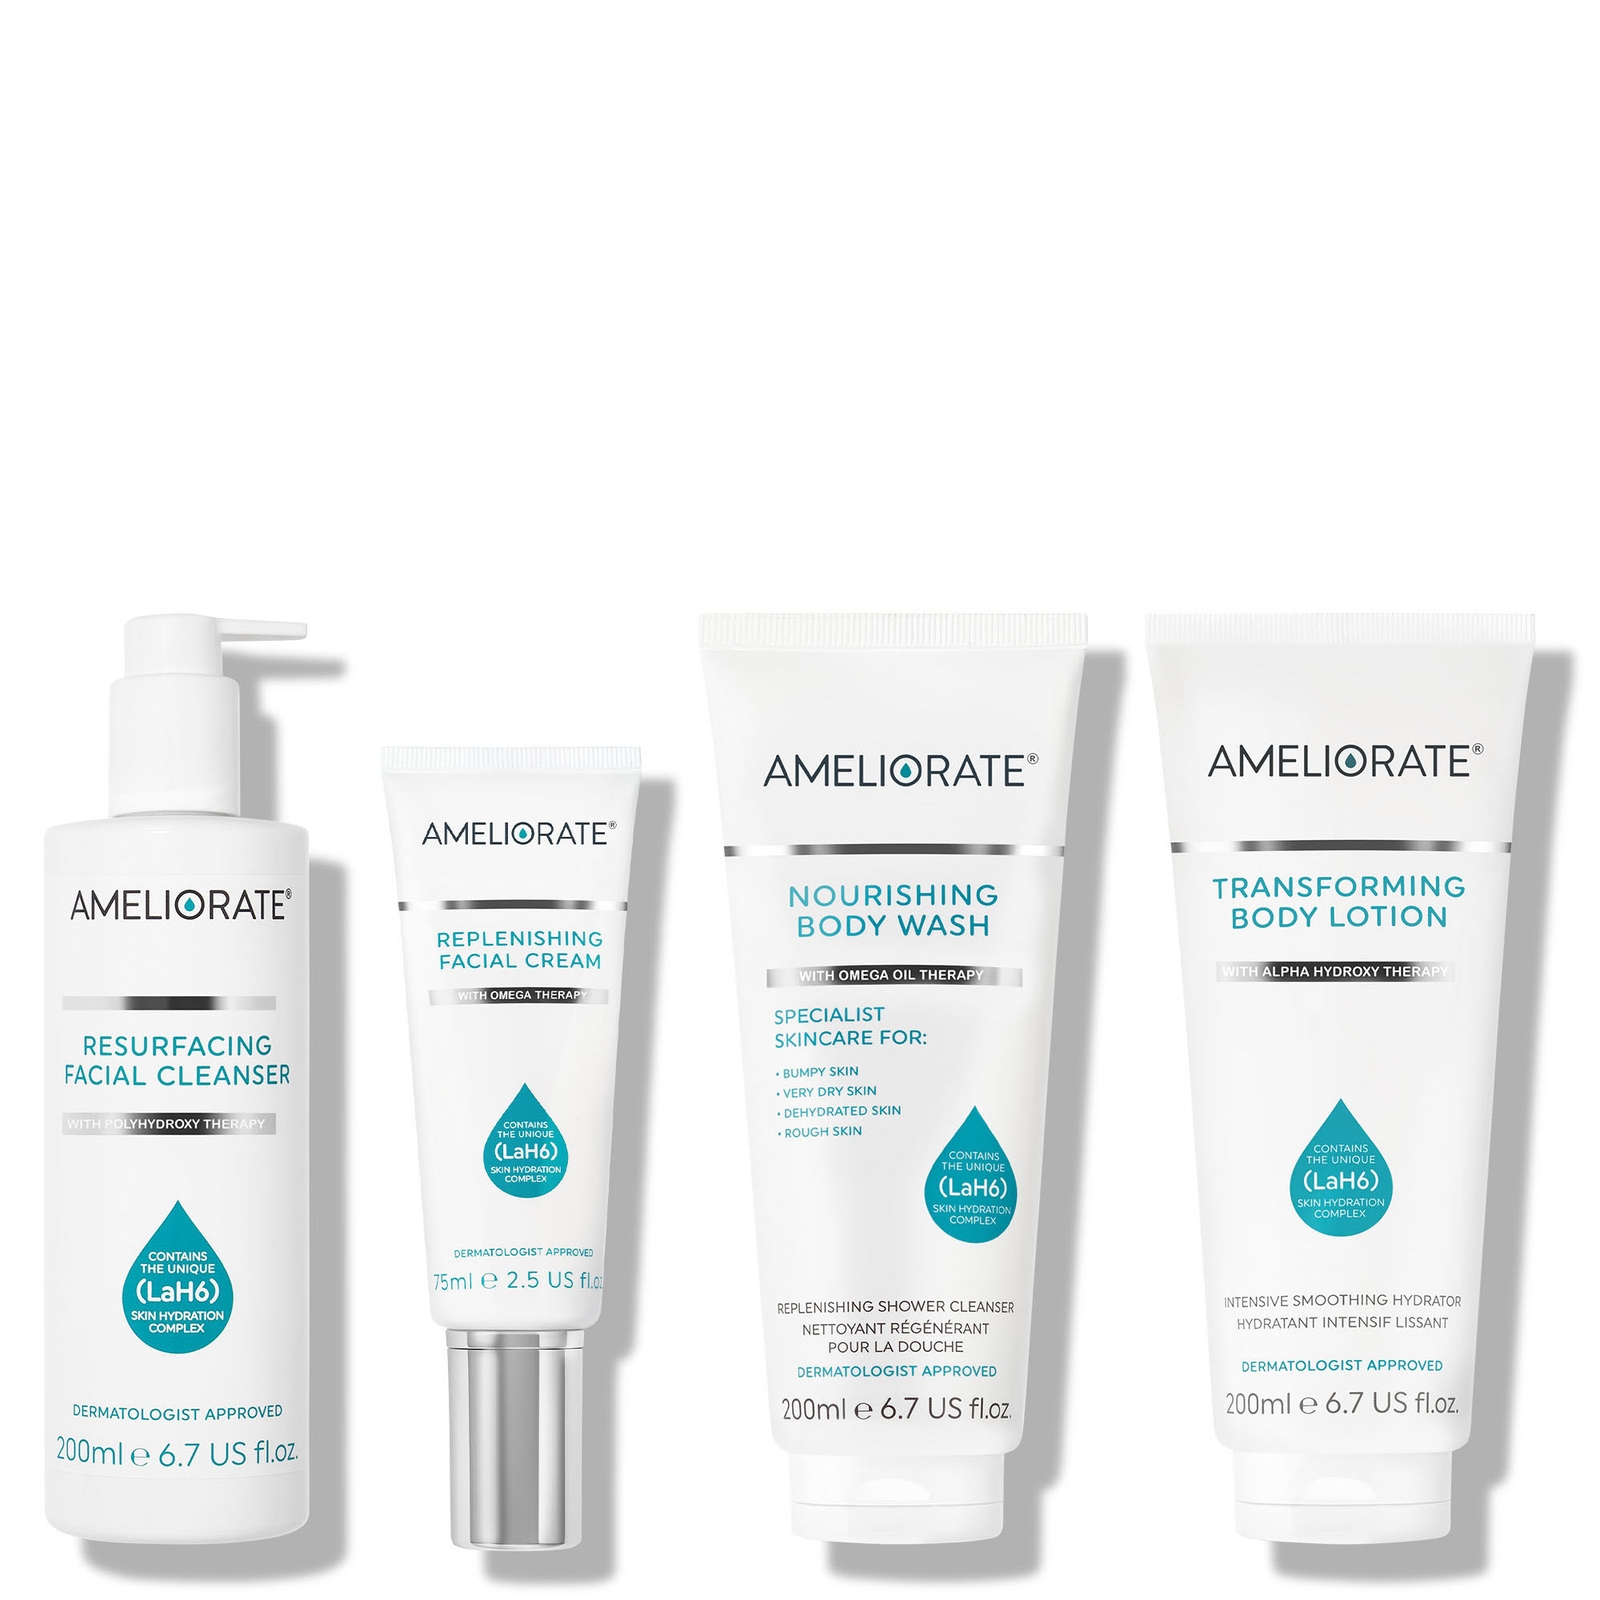 AMELIORATE Face & Body Dry Skin Bundle